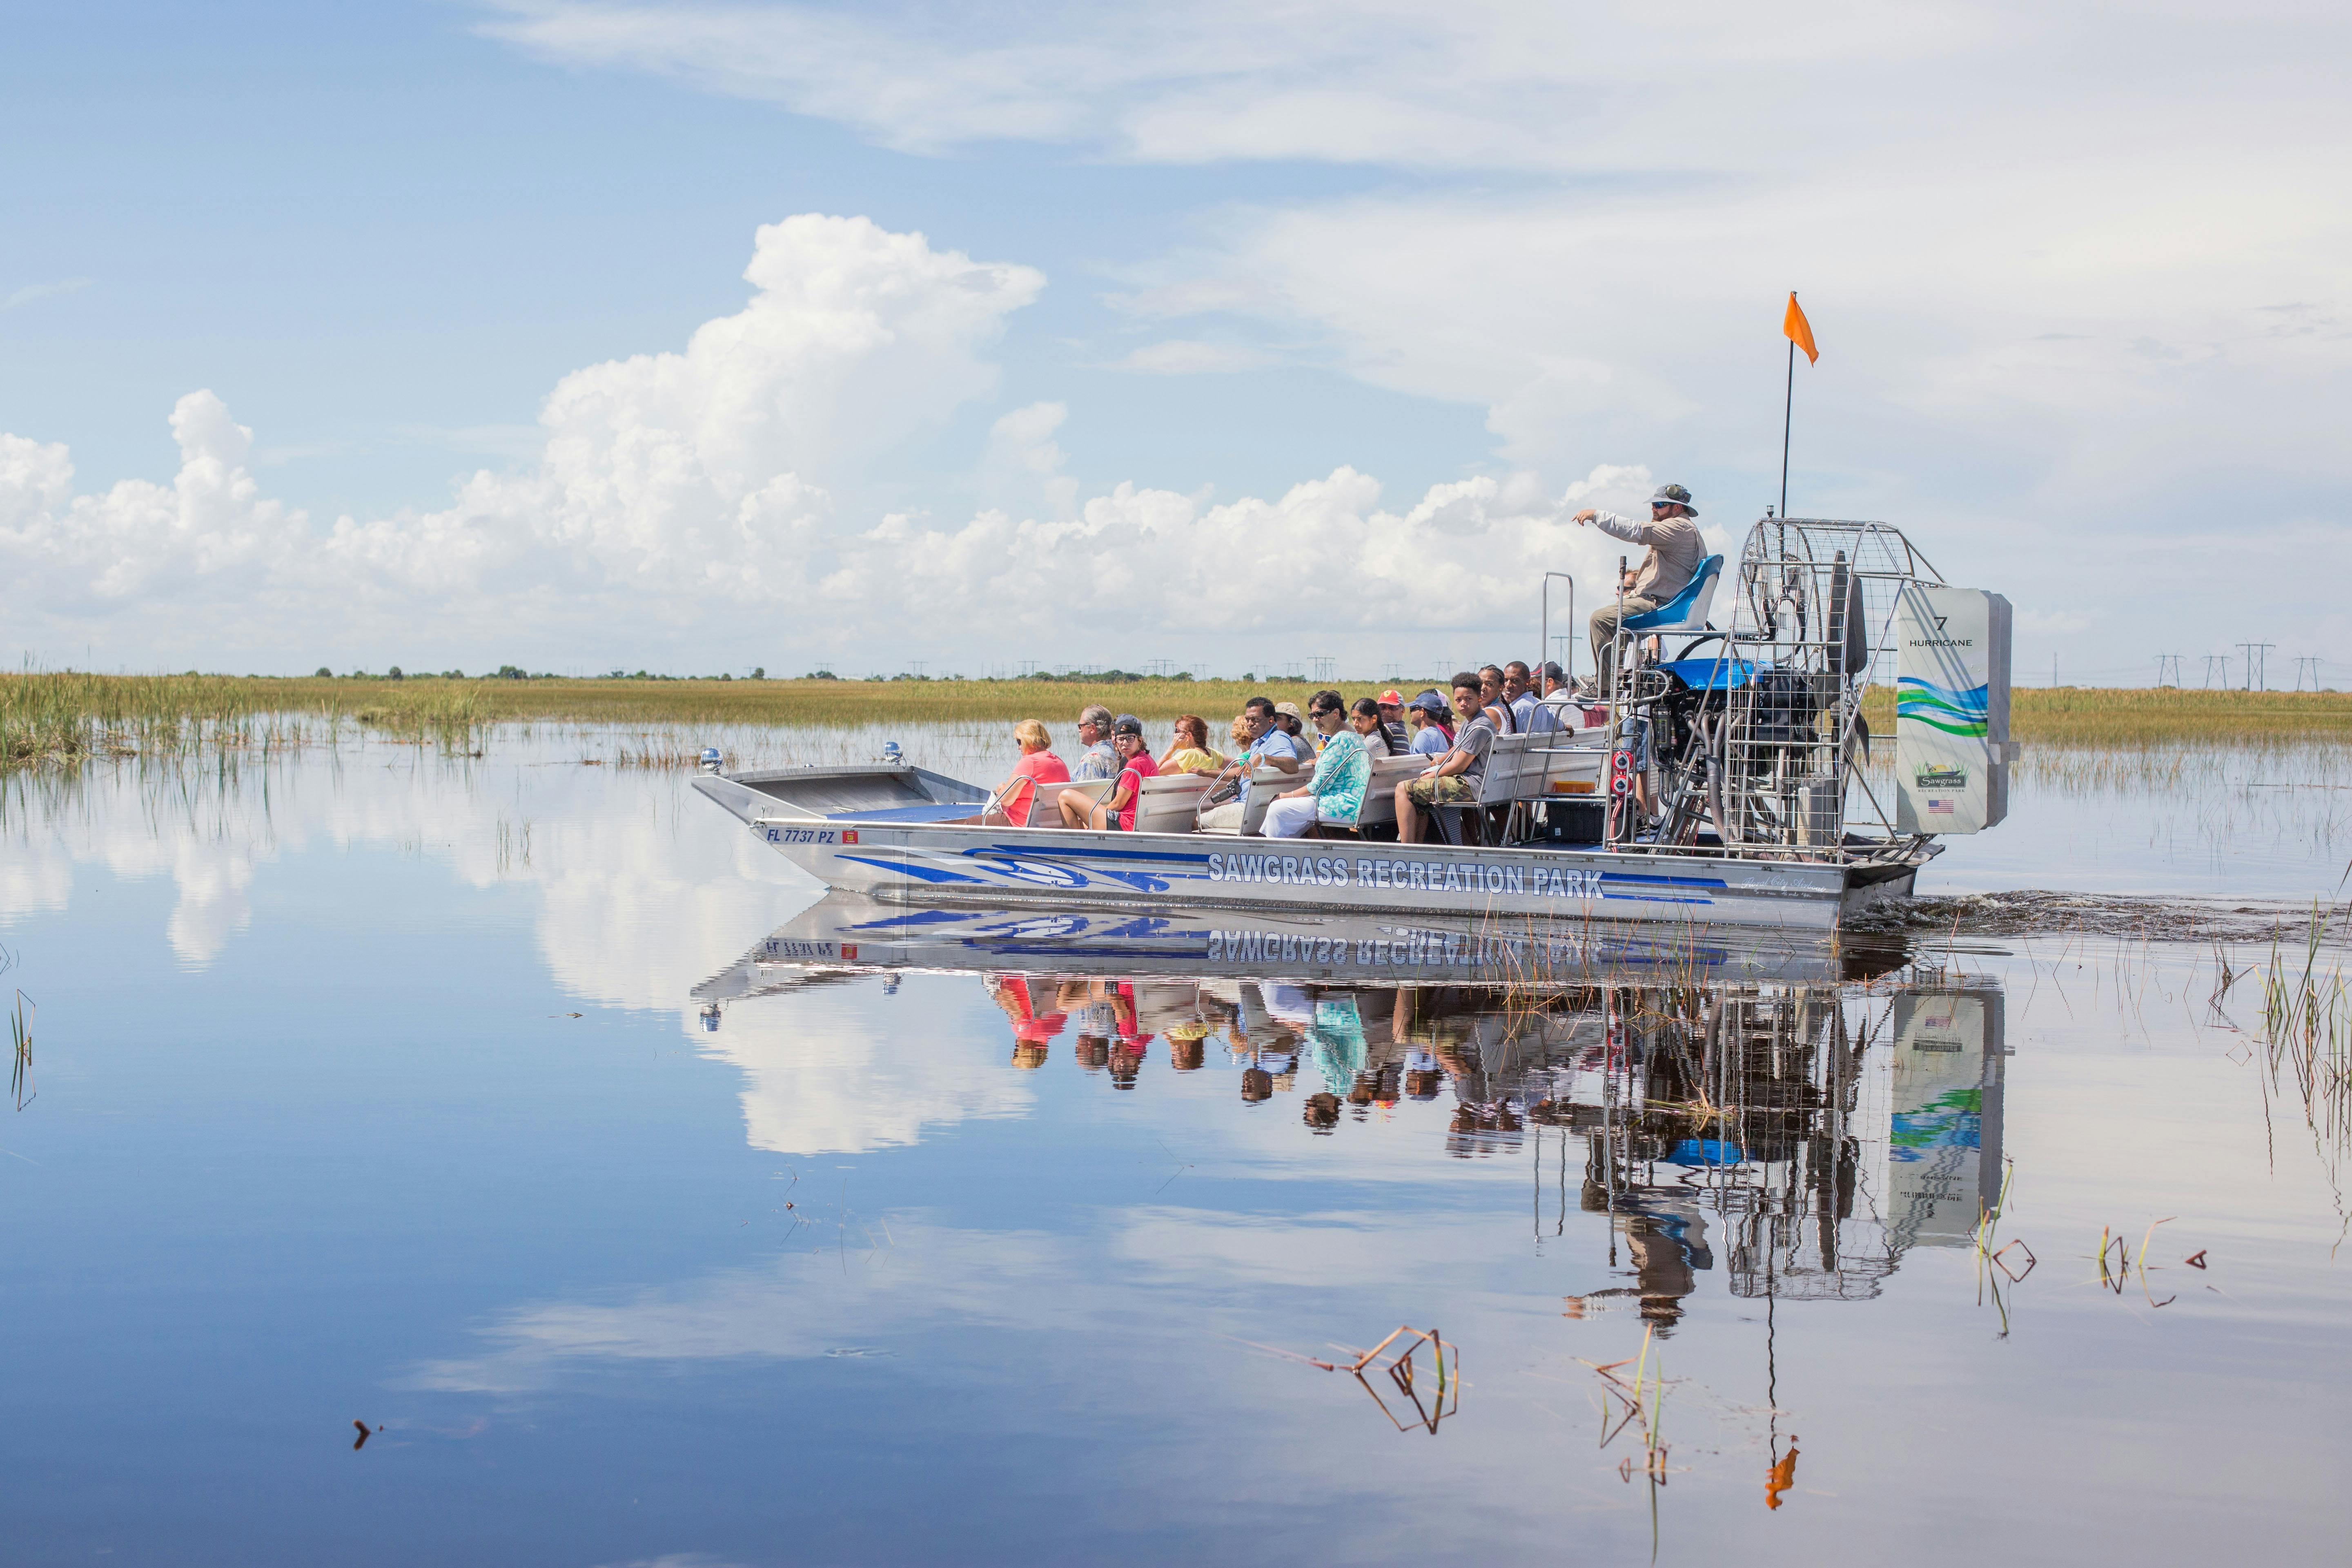 30 minute daytime airboat tour at Sawgrass Recreation Park Musement